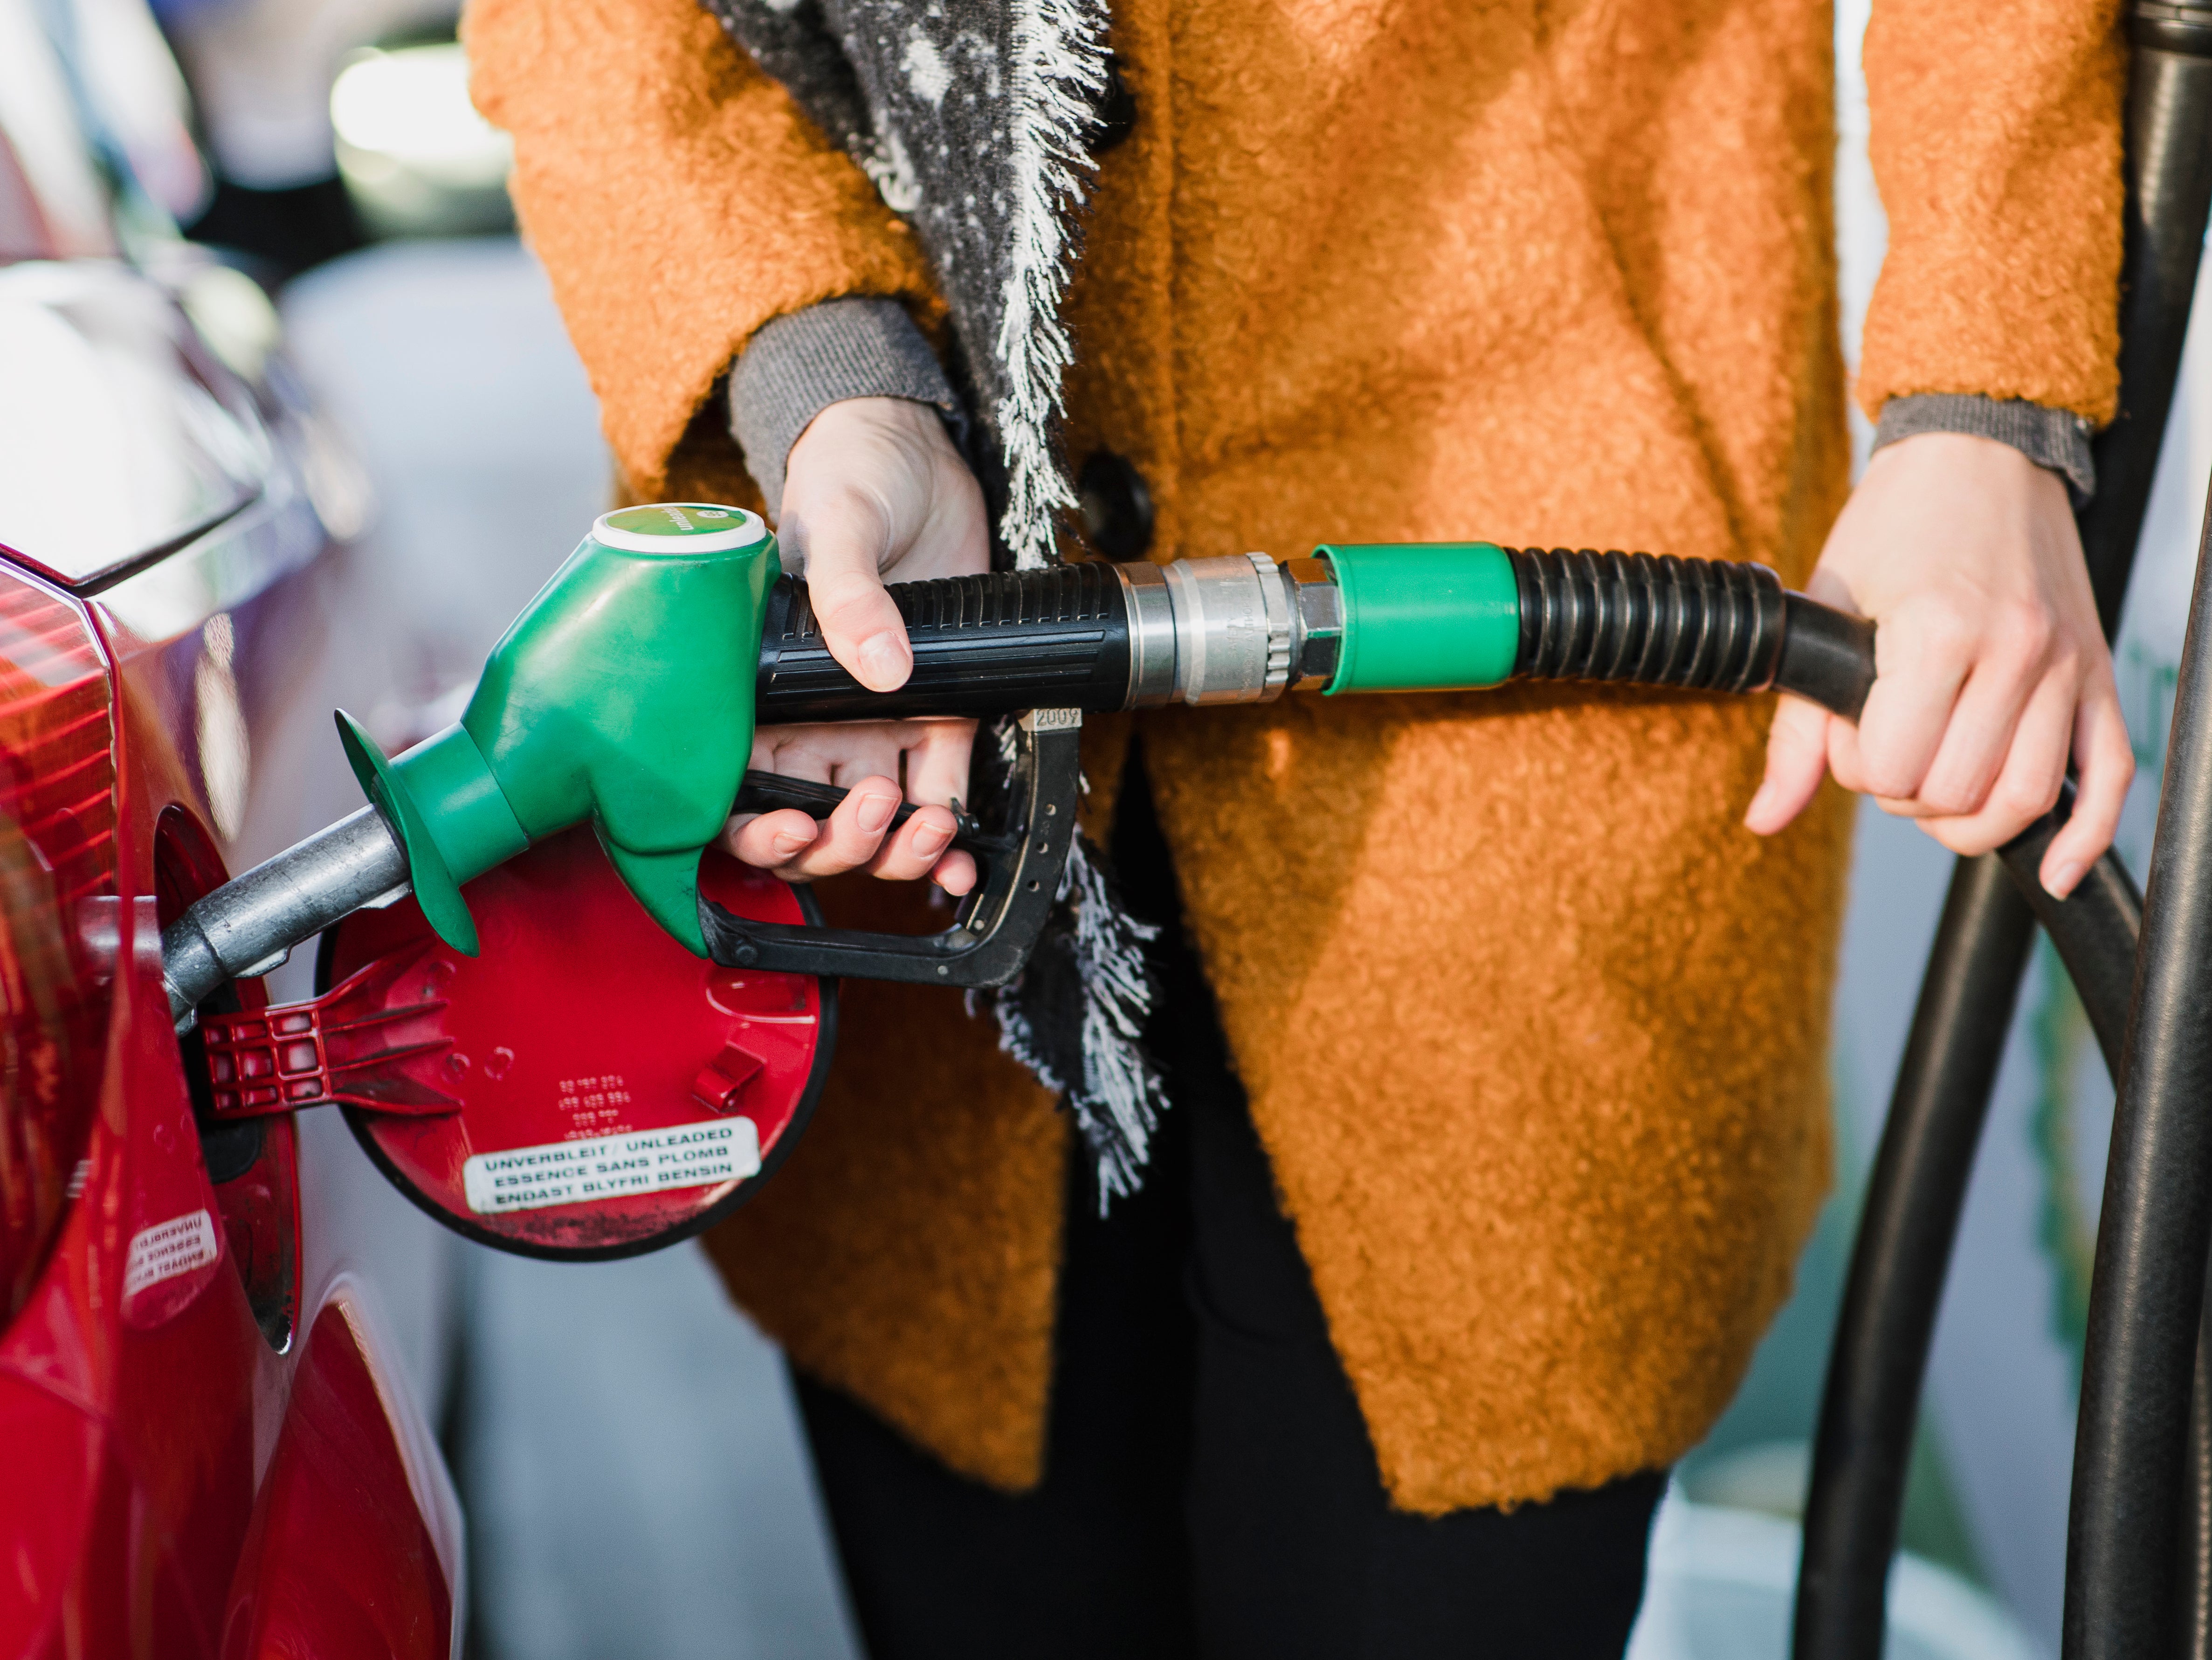 Labour is calling on the government to act over the spiralling cost of living as figures suggest families face a near £400 annual rise in the cost of petrol